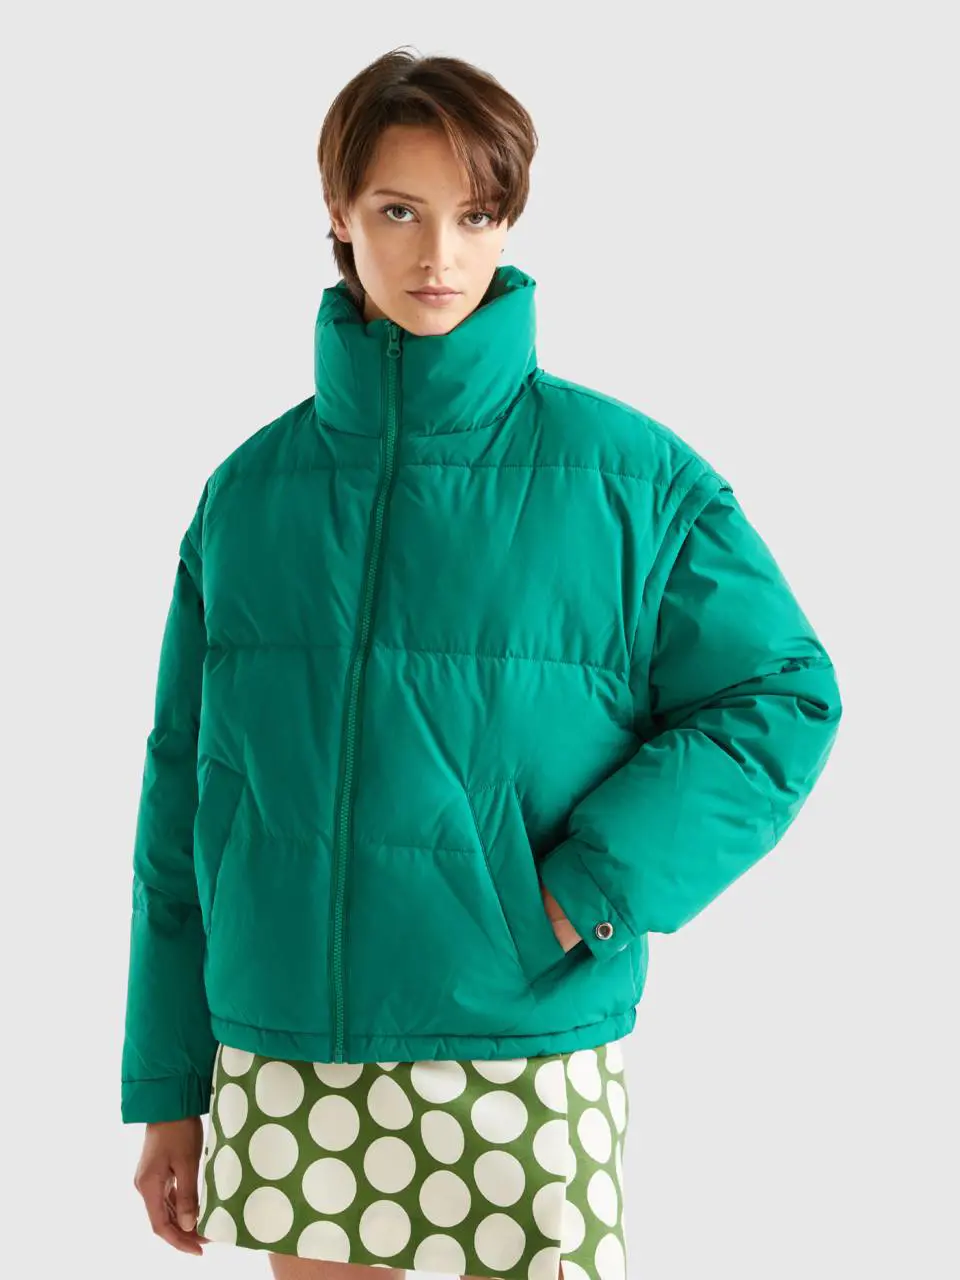 Benetton short padded jacket with removable sleeves. 1